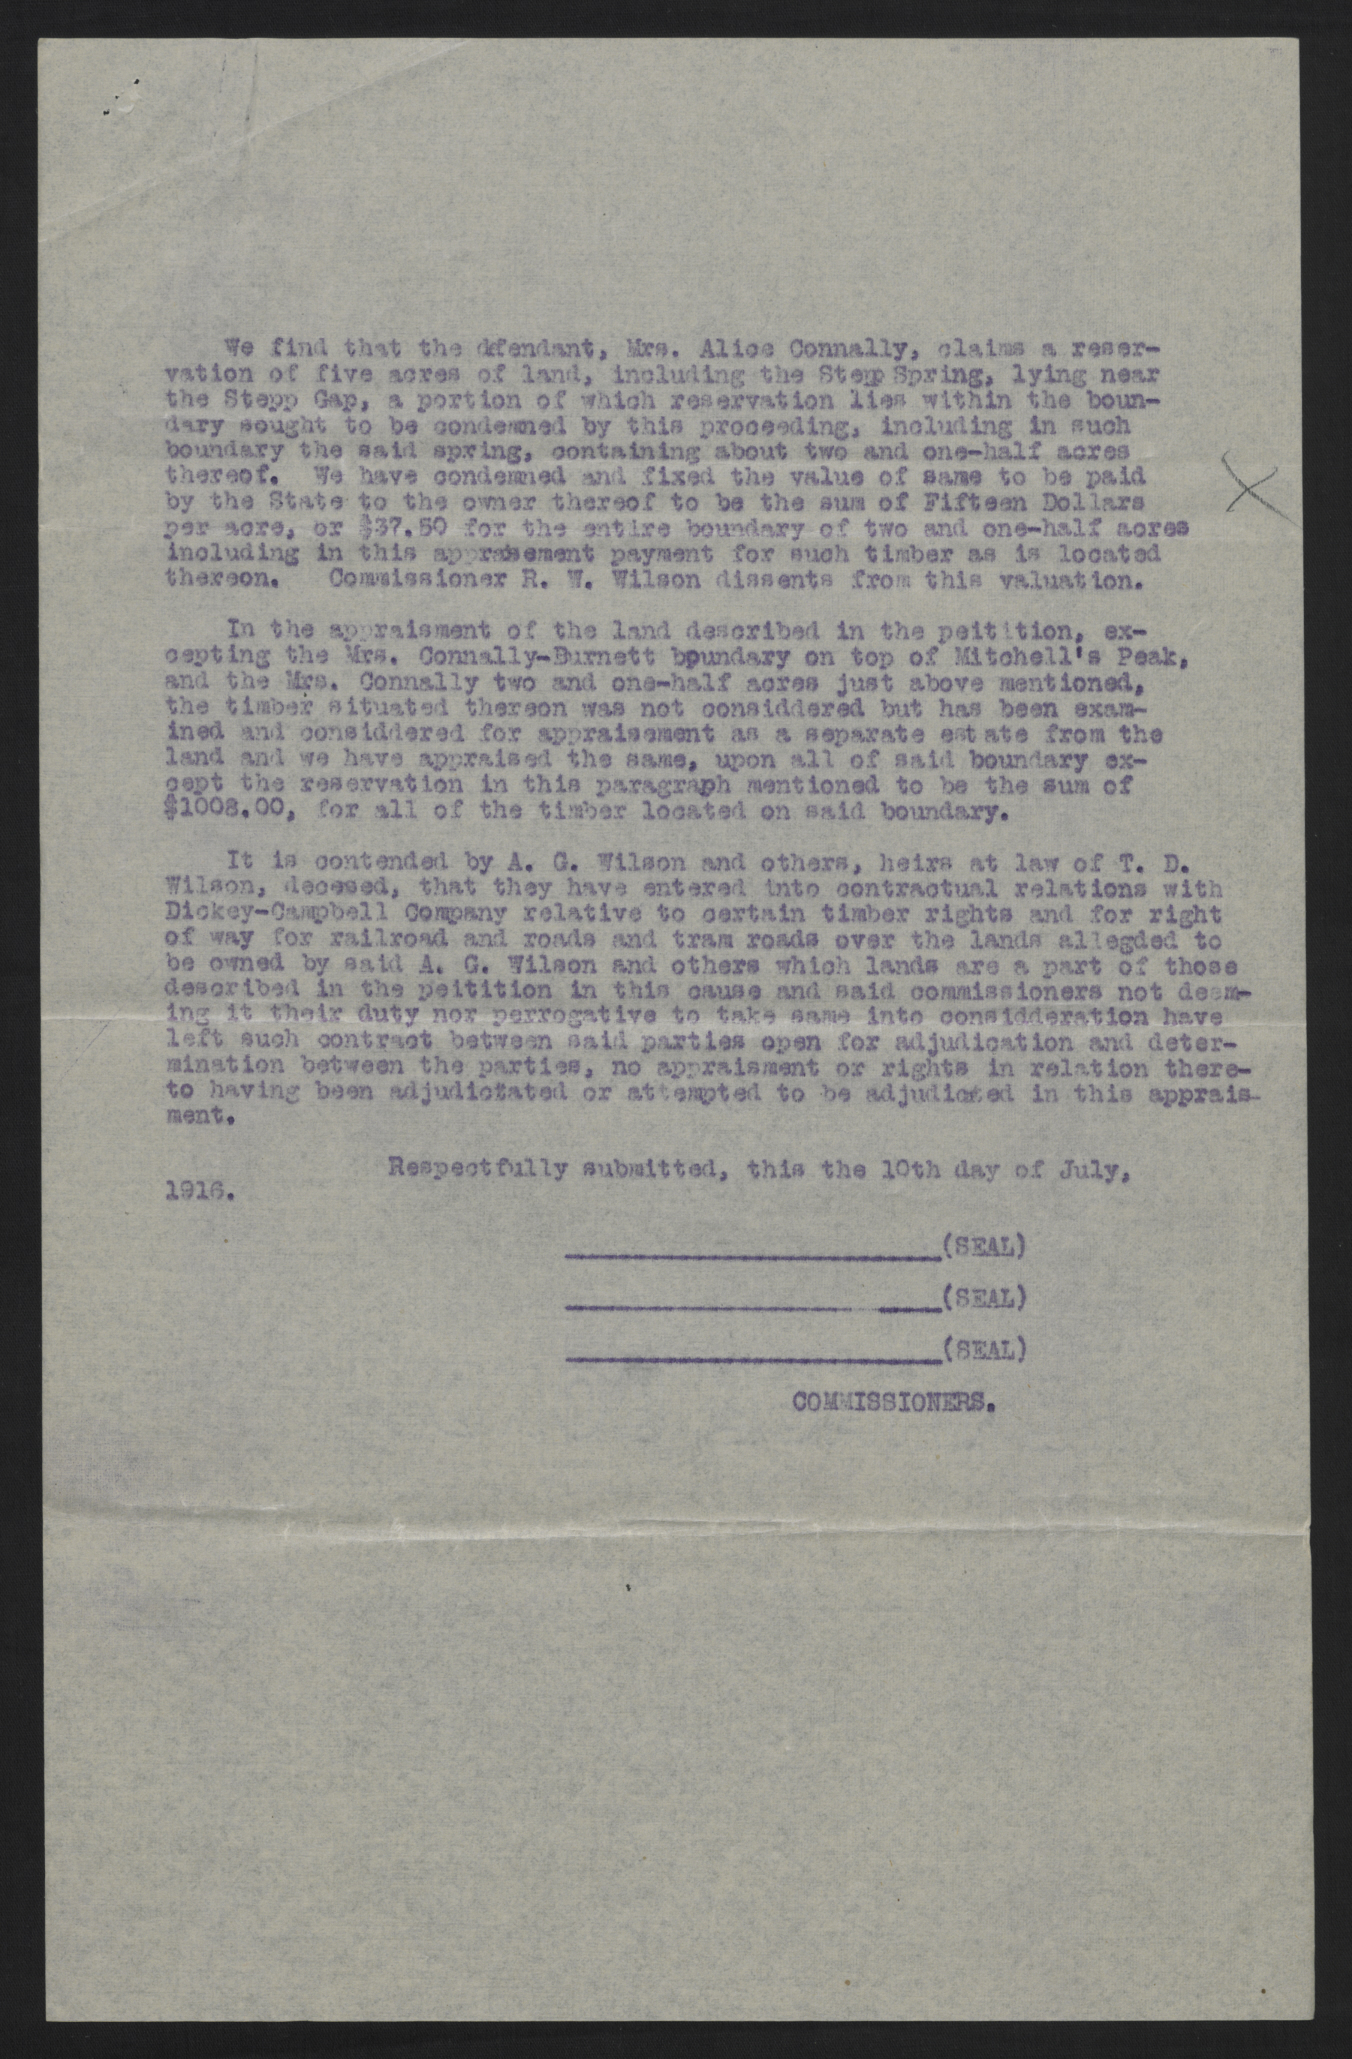 Report of the Mitchell Peak Park Commission, 10 July 1916, page 3